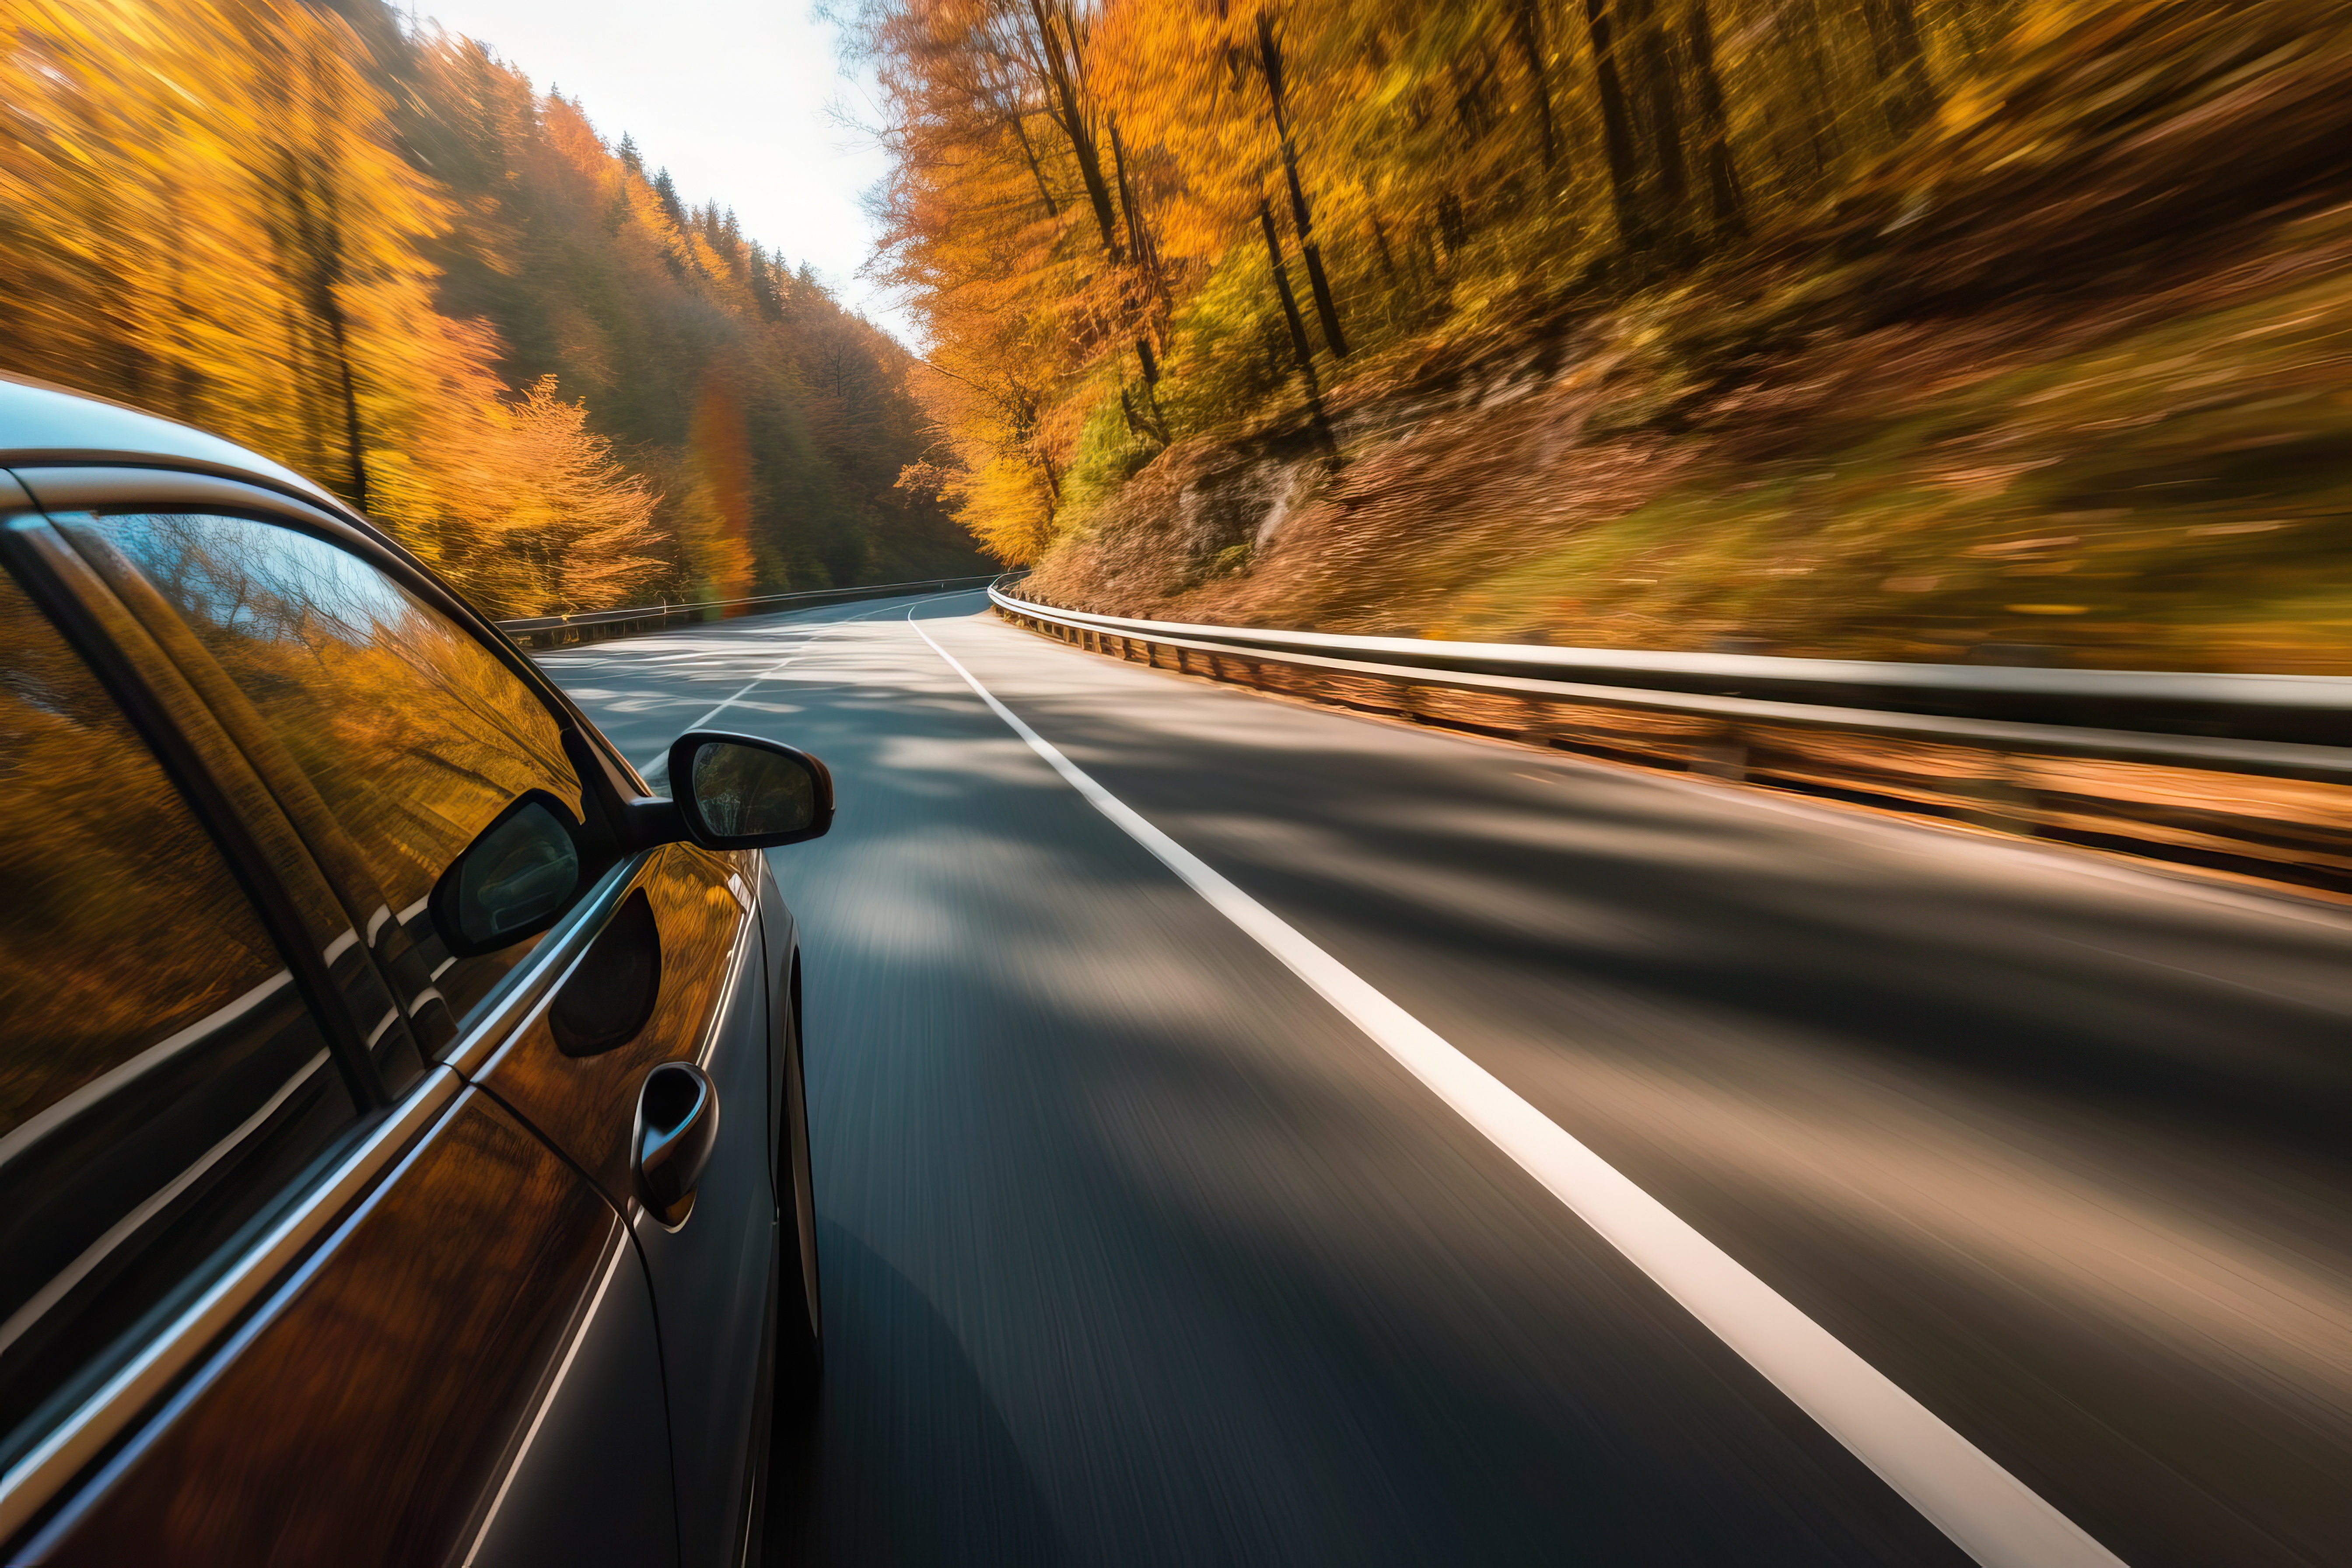 Automobile on the highway with fall leaves